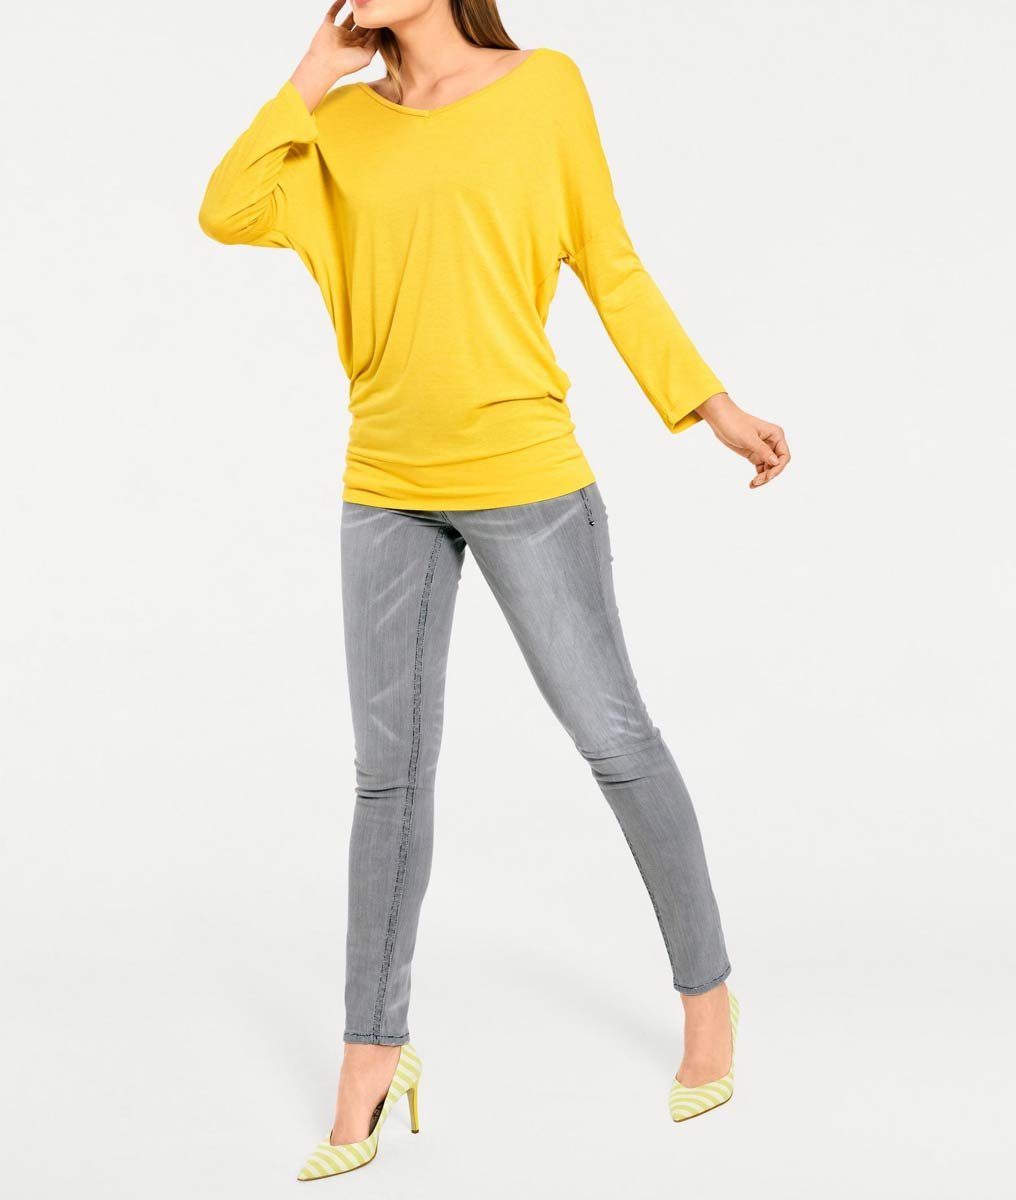 gelb Oversized-Shirt, Connections Best Connection Oversize-Shirt heine Heine by B.C. Best - Damen